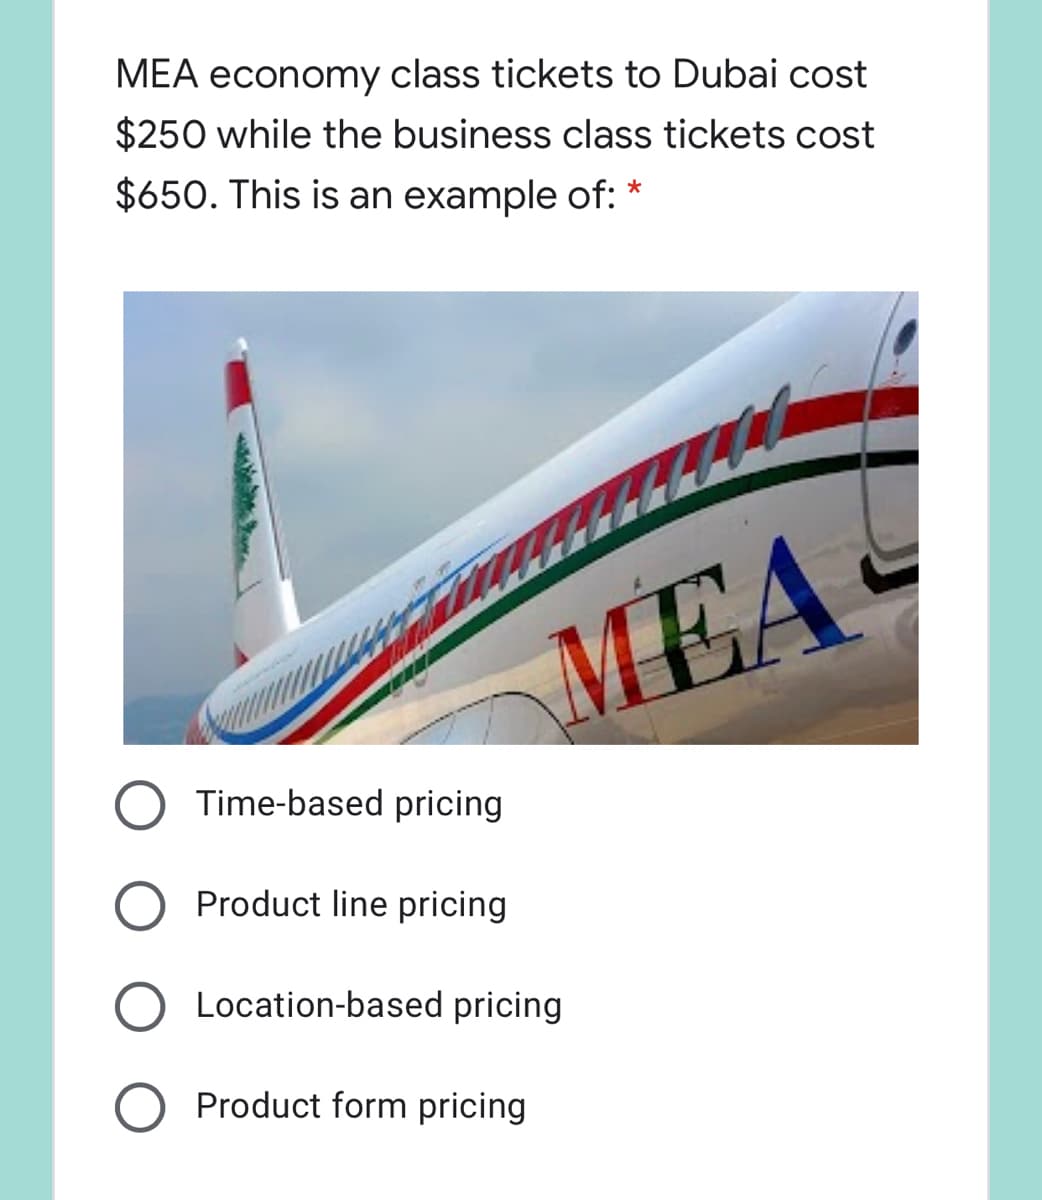 MEA economy class tickets to Dubai cost
$250 while the business class tickets cost
$650. This is an example of: *
MEA
Time-based pricing
Product line pricing
Location-based pricing
Product form pricing
